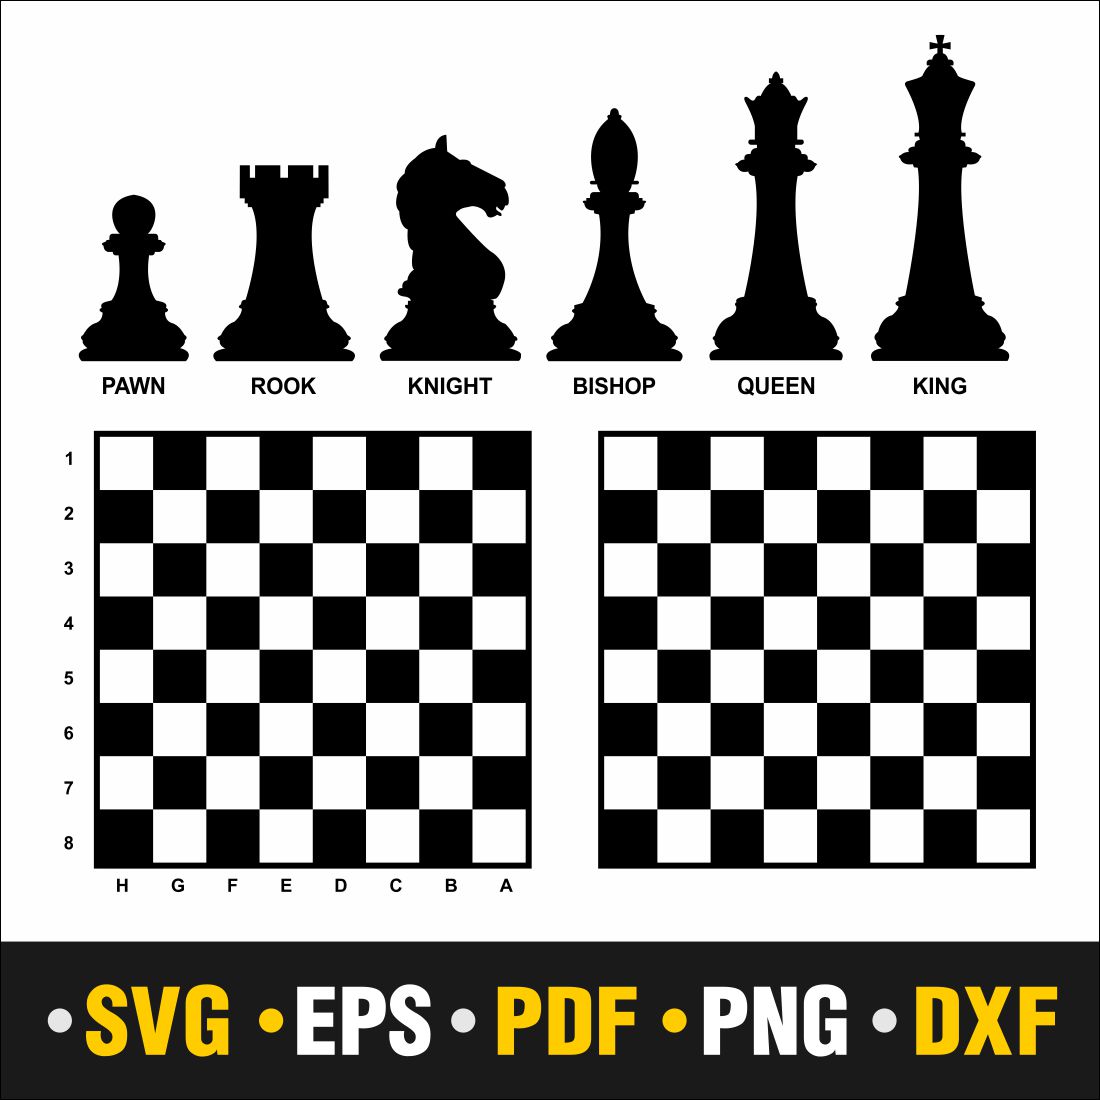 Check Board Svg, Check Board, Chess Svg, Chess Png, Chess Svg, Horse Svg, Pawn Svg, Rock Svg, Knight Svg, Bishop Svg, Queen Svg, King Svg Instant Download Vector Cut file Cricut, Silhouette, Pdf Png, Dxf, Decal cover image.